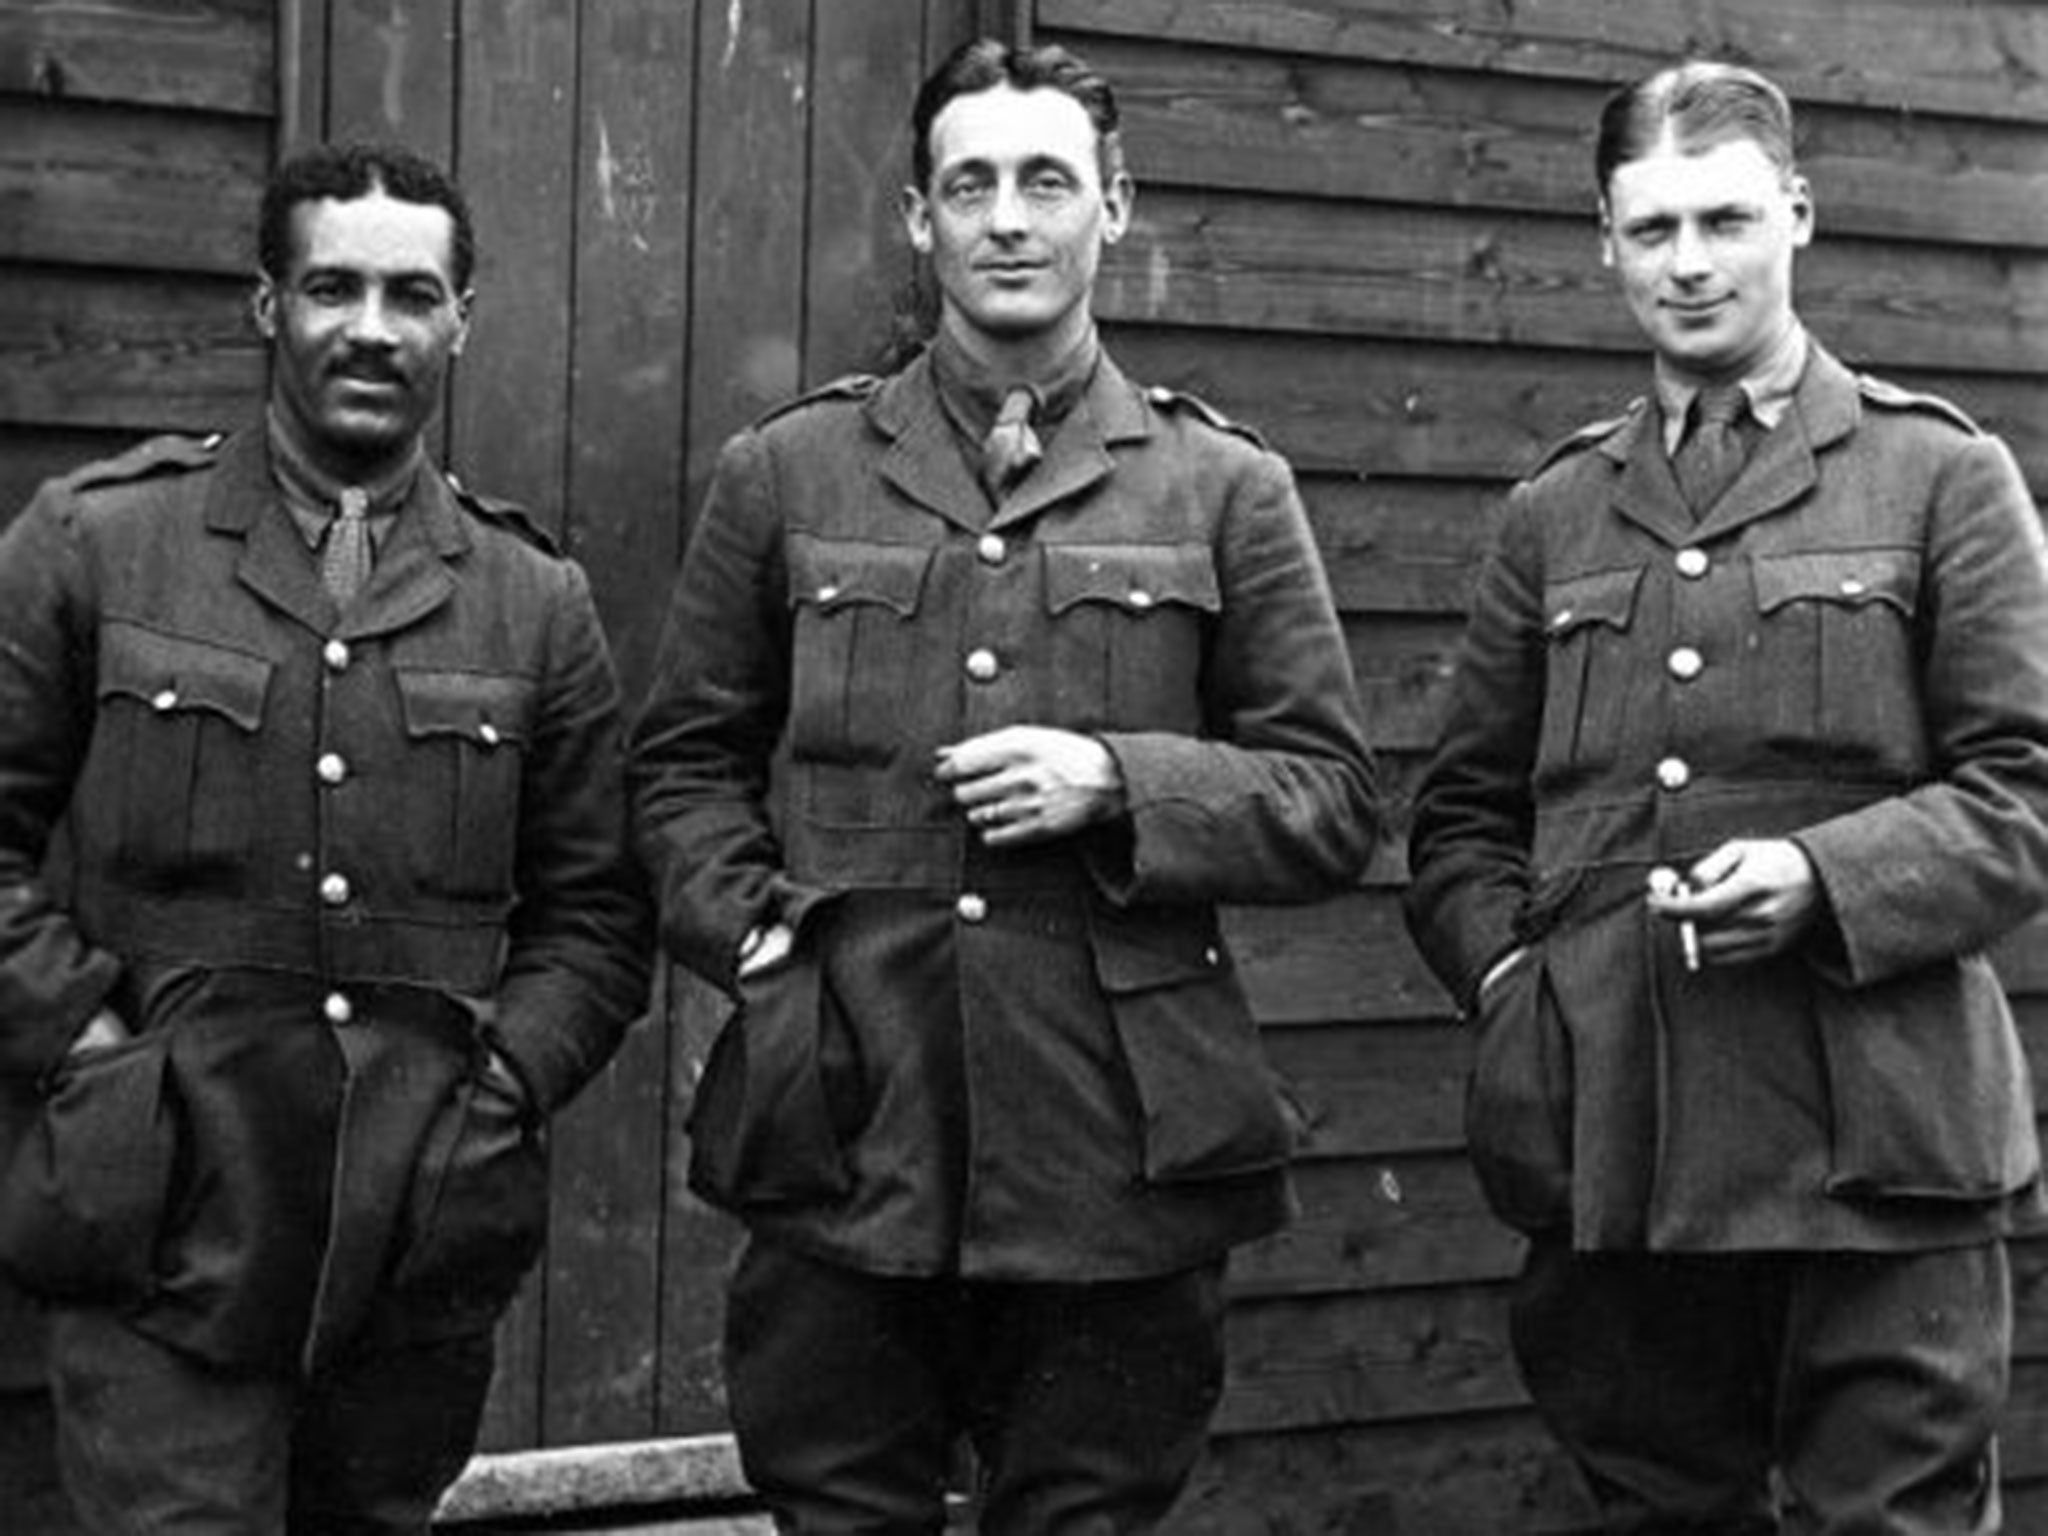 Walter Tull, left, Britain’s first black Army officer, in a photograph handed down to his great-nephew Edward Finlayson